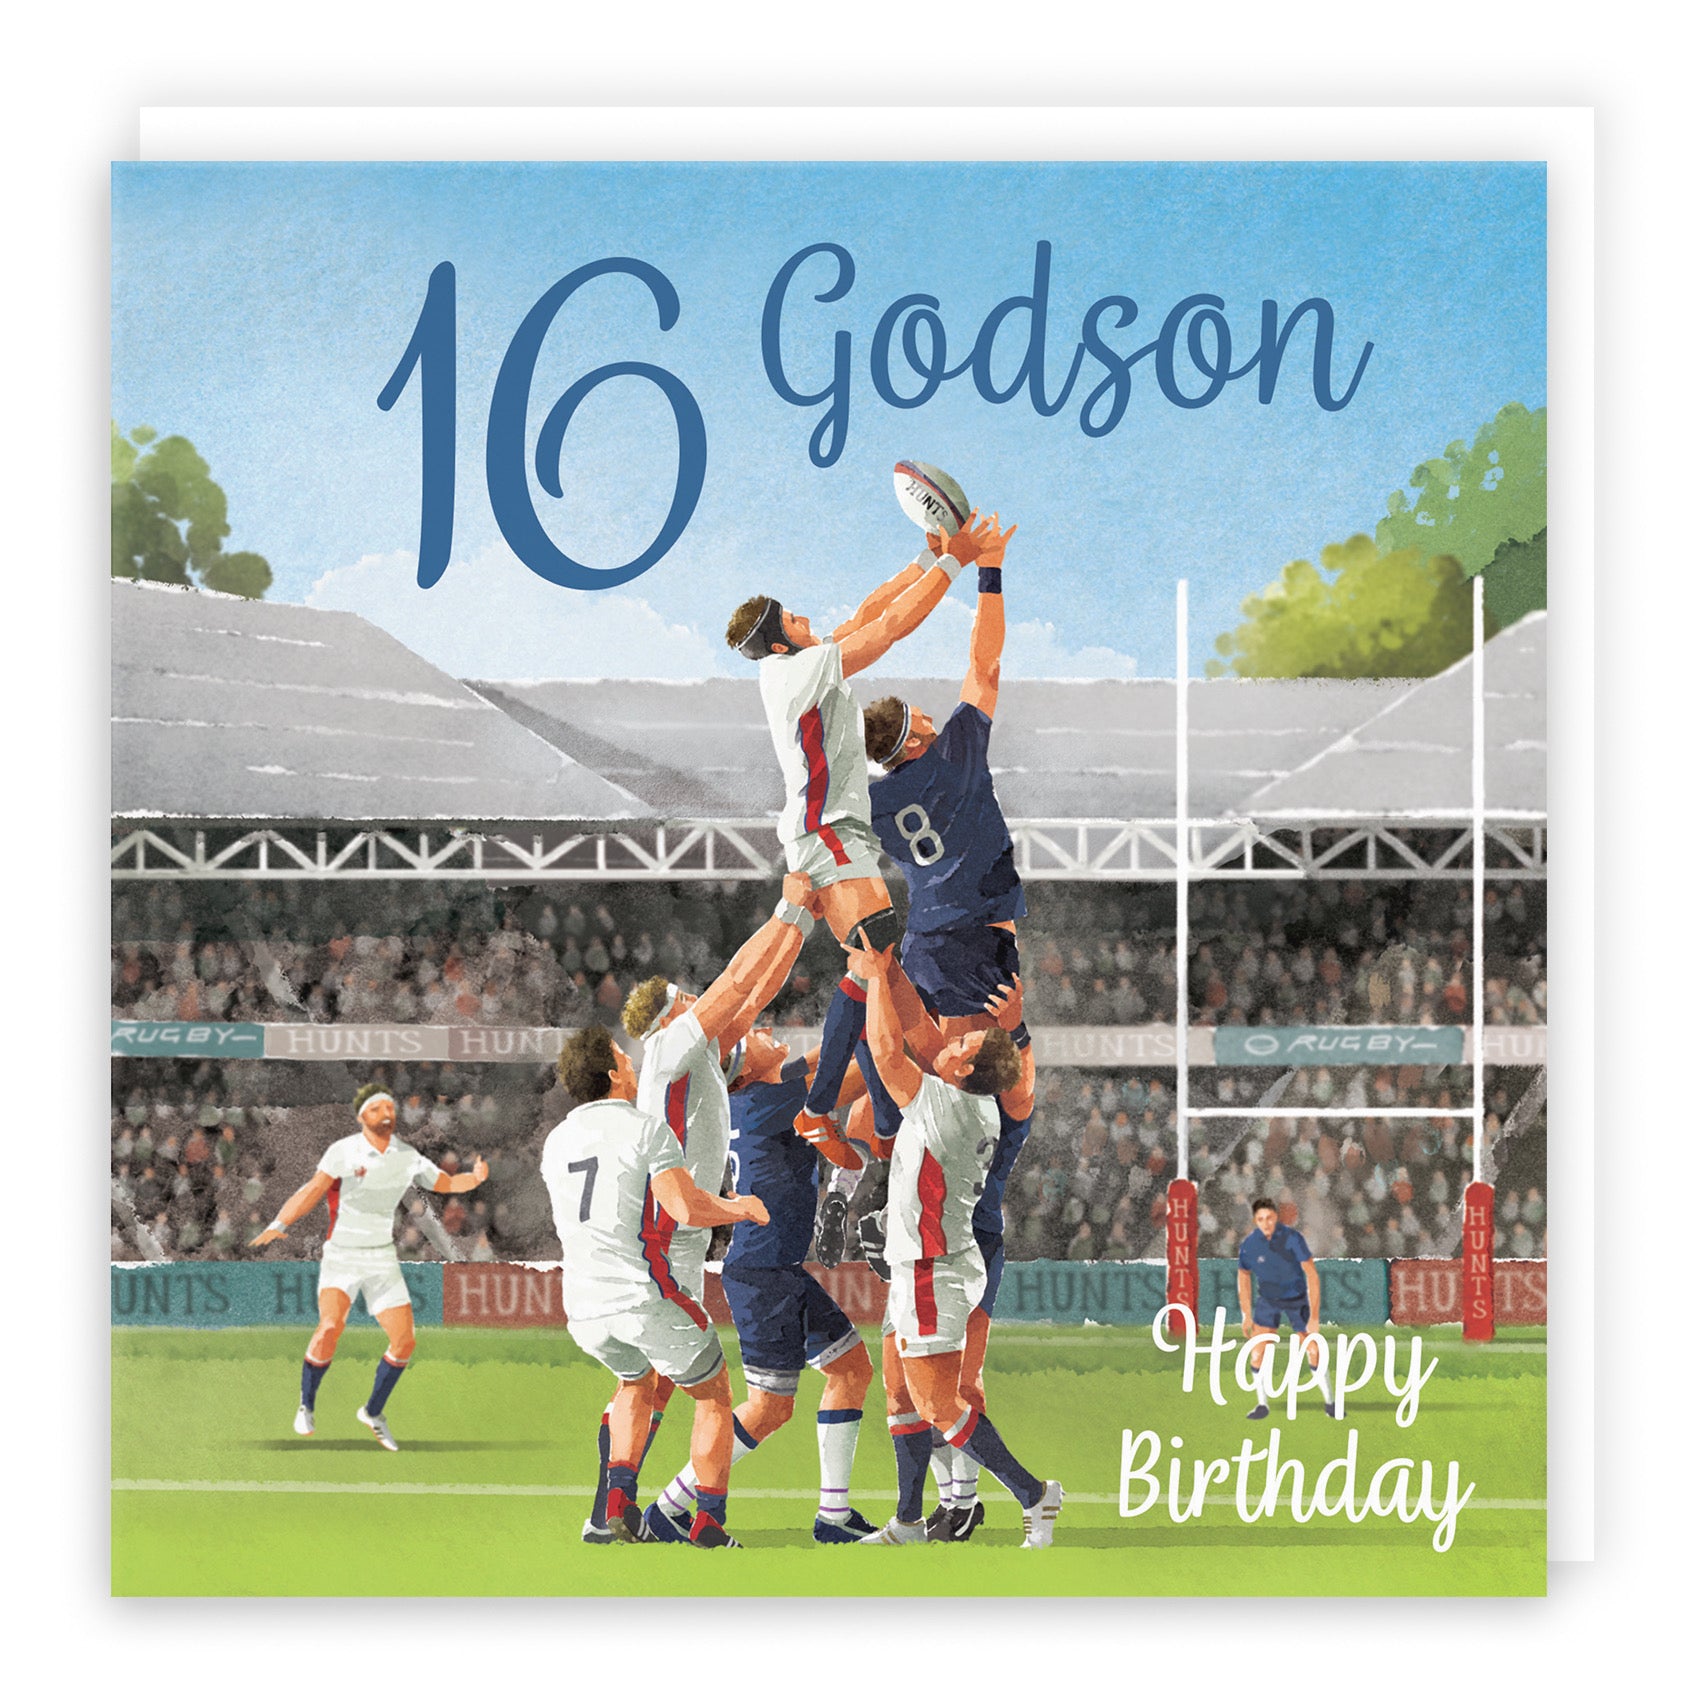 16th Godson Rugby Birthday Card Milo's Gallery - Default Title (B0CPR43BY9)